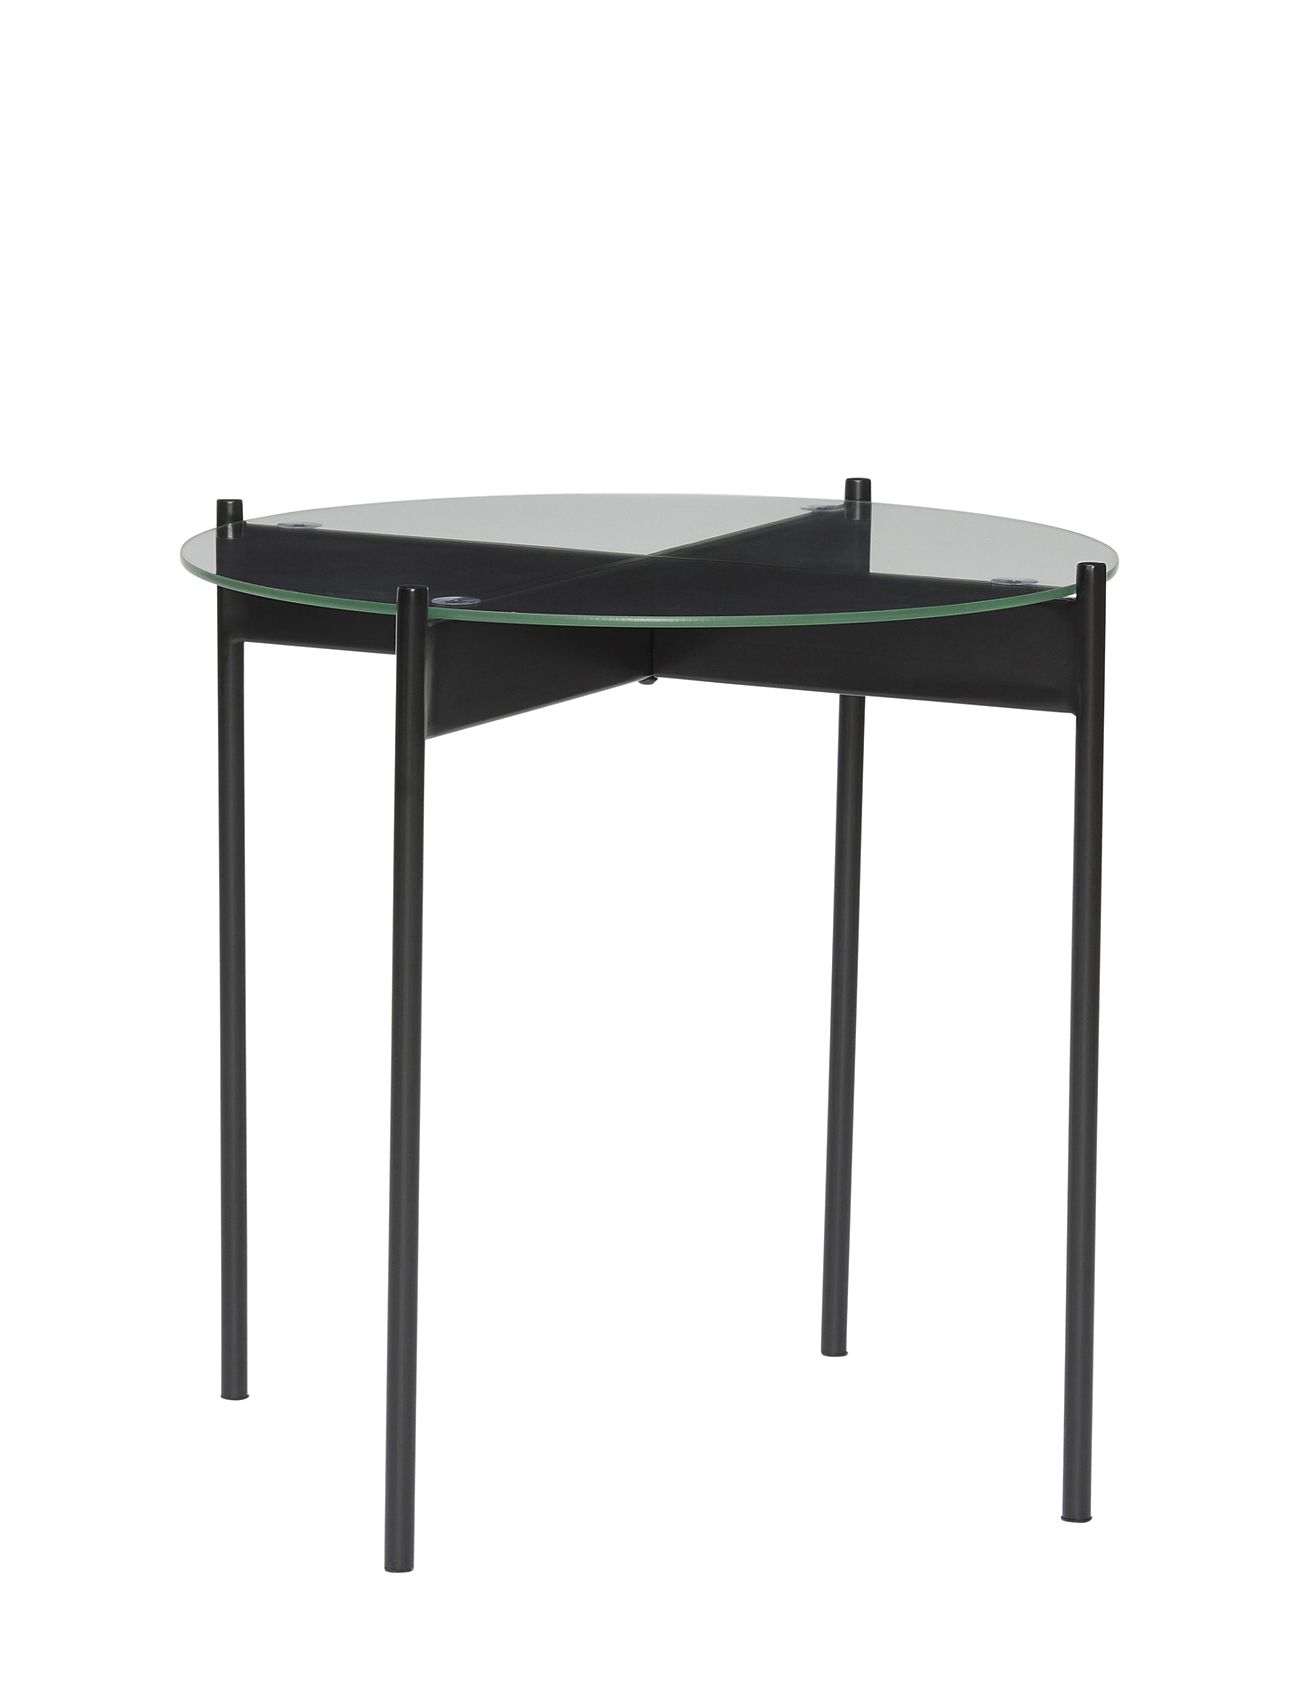 Beam Bord Home Furniture Tables Side Tables & Small Tables Black Hübsch